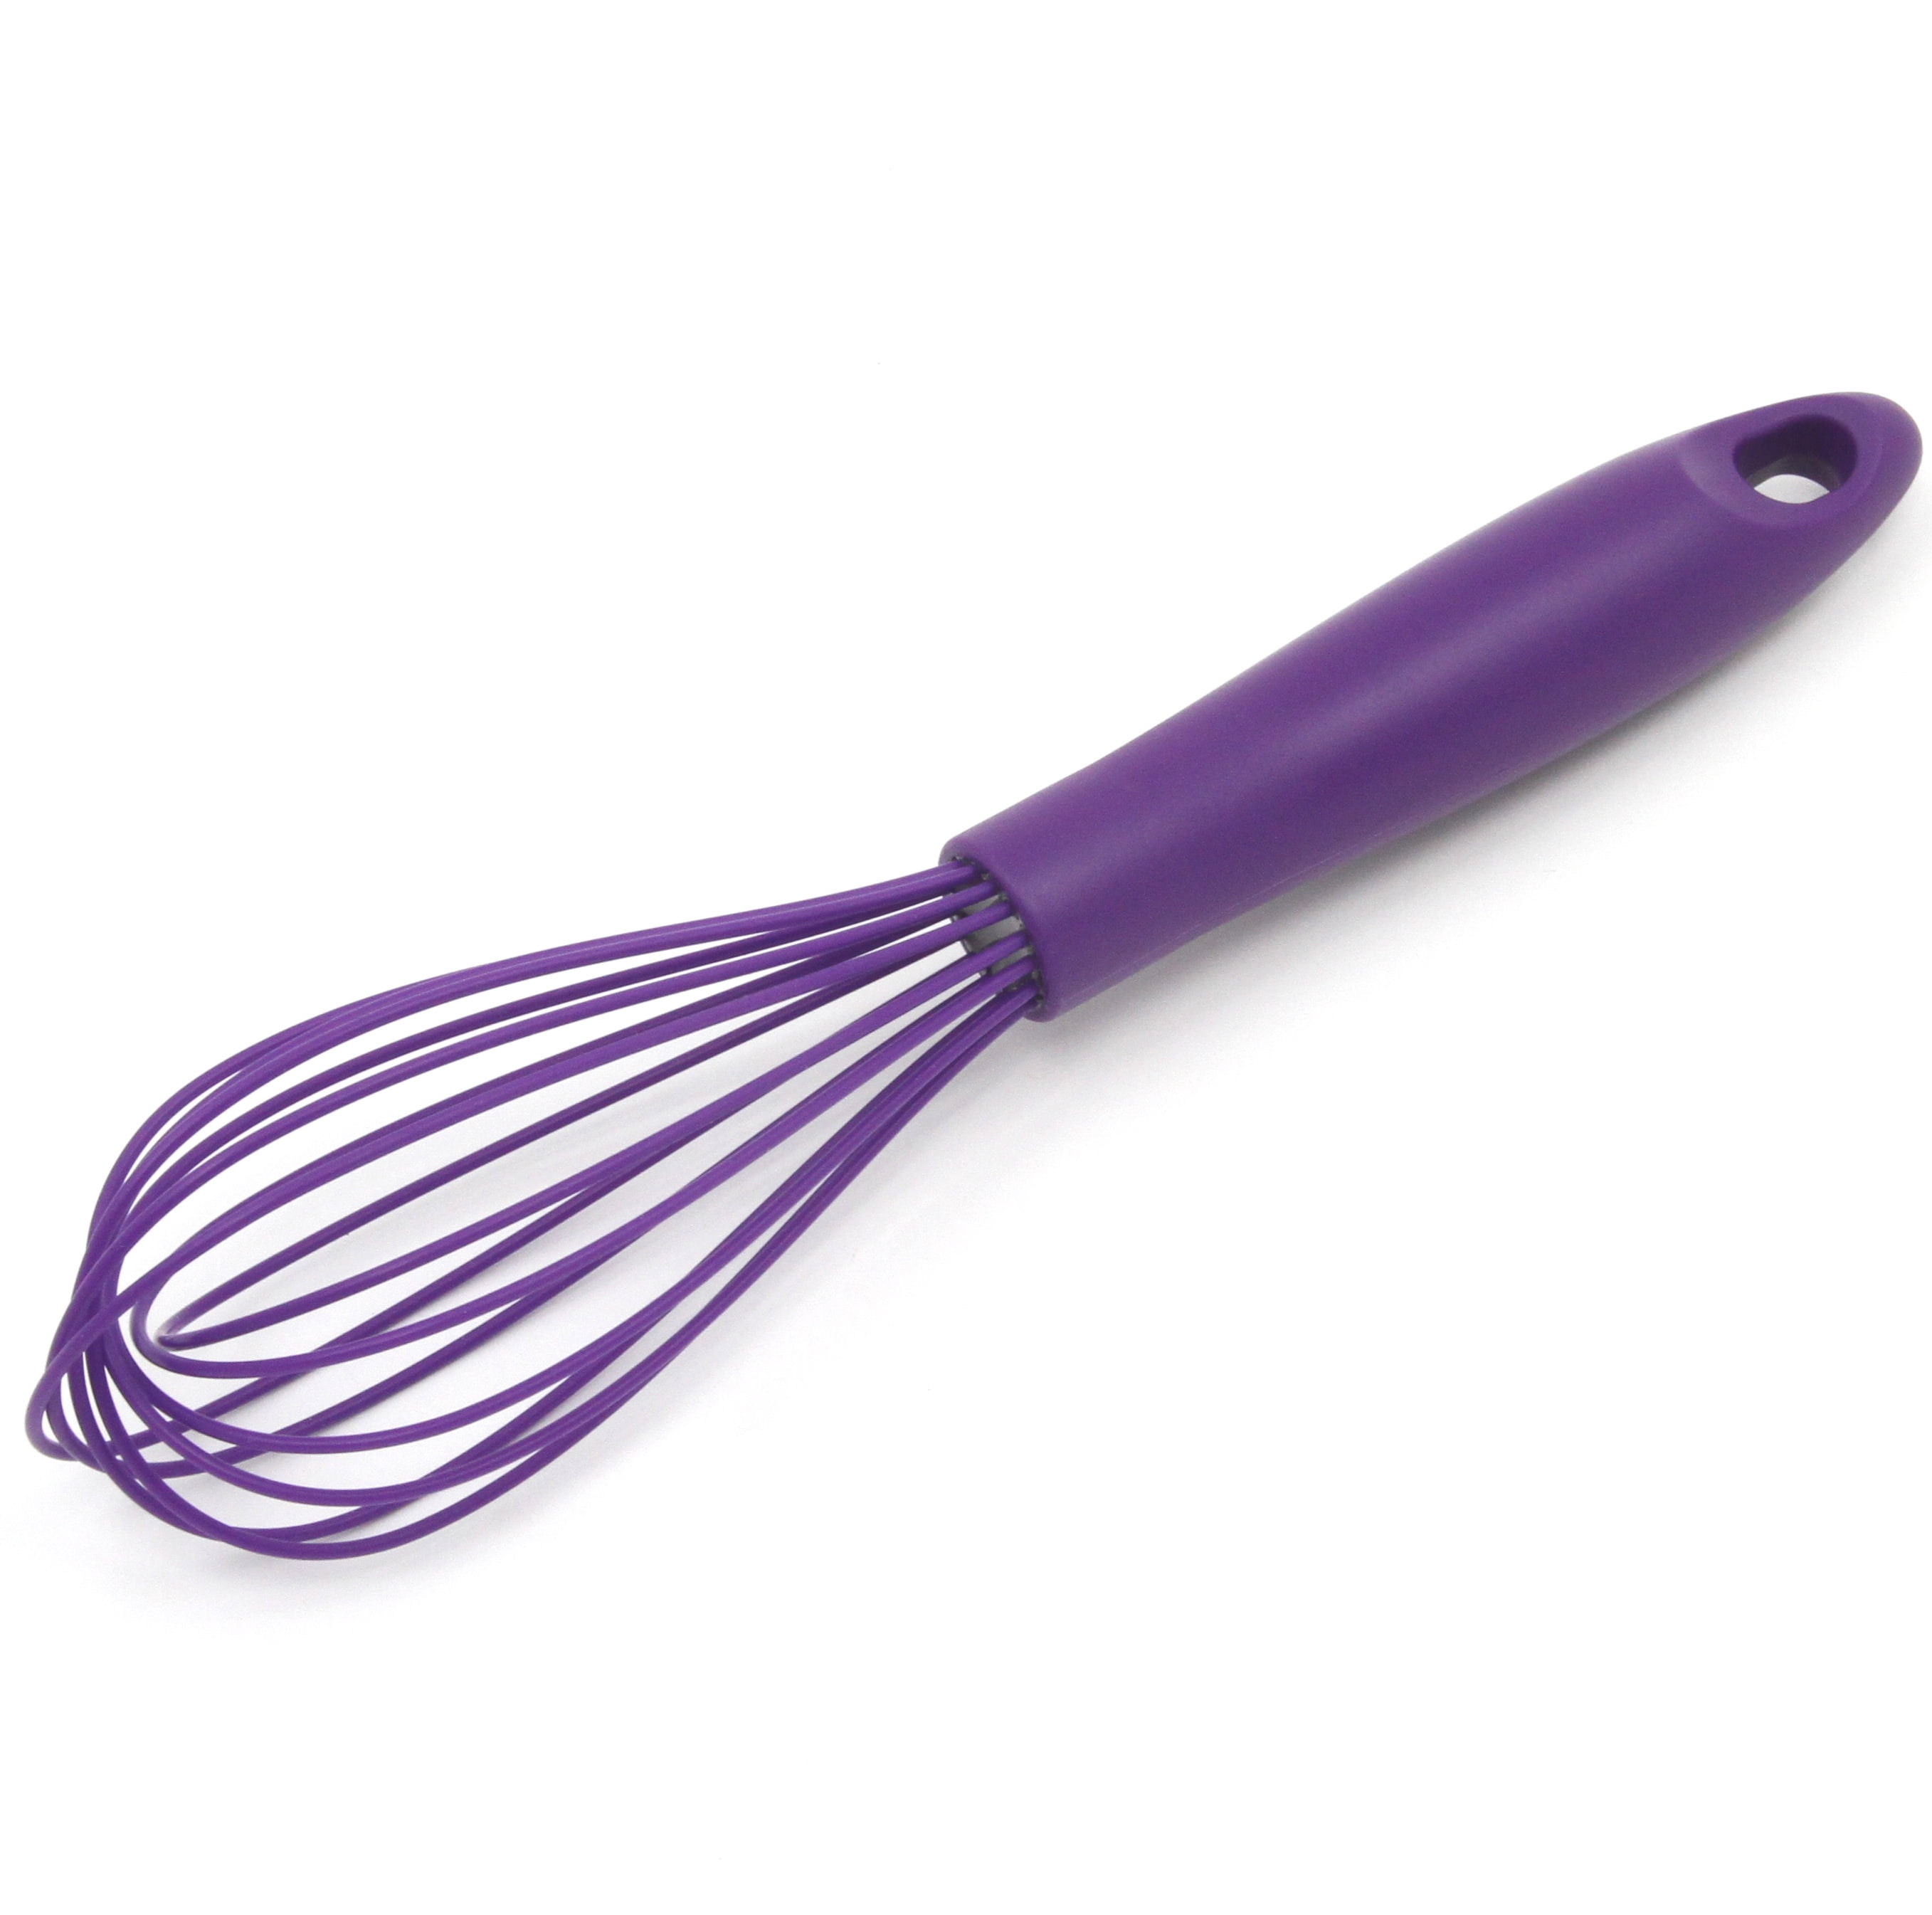 Flat Whisk Silicone Handle Non Slip 10 inch - 5 Wires Whisk with 10 Heads for Kitchen Cooking Color Red by Jell-Cell